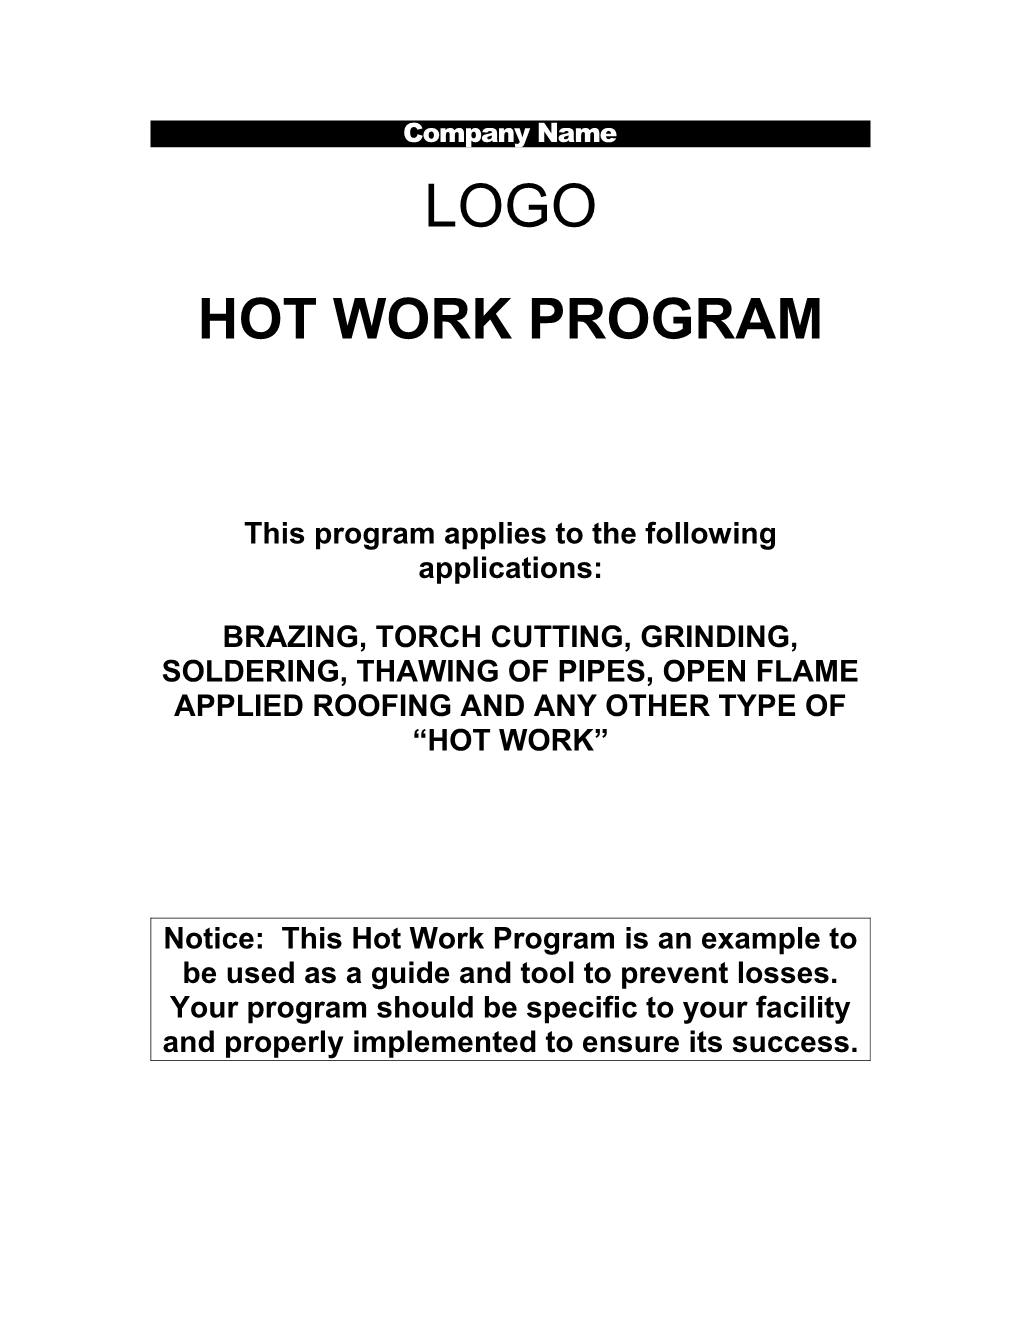 This Program Applies to the Following Applications